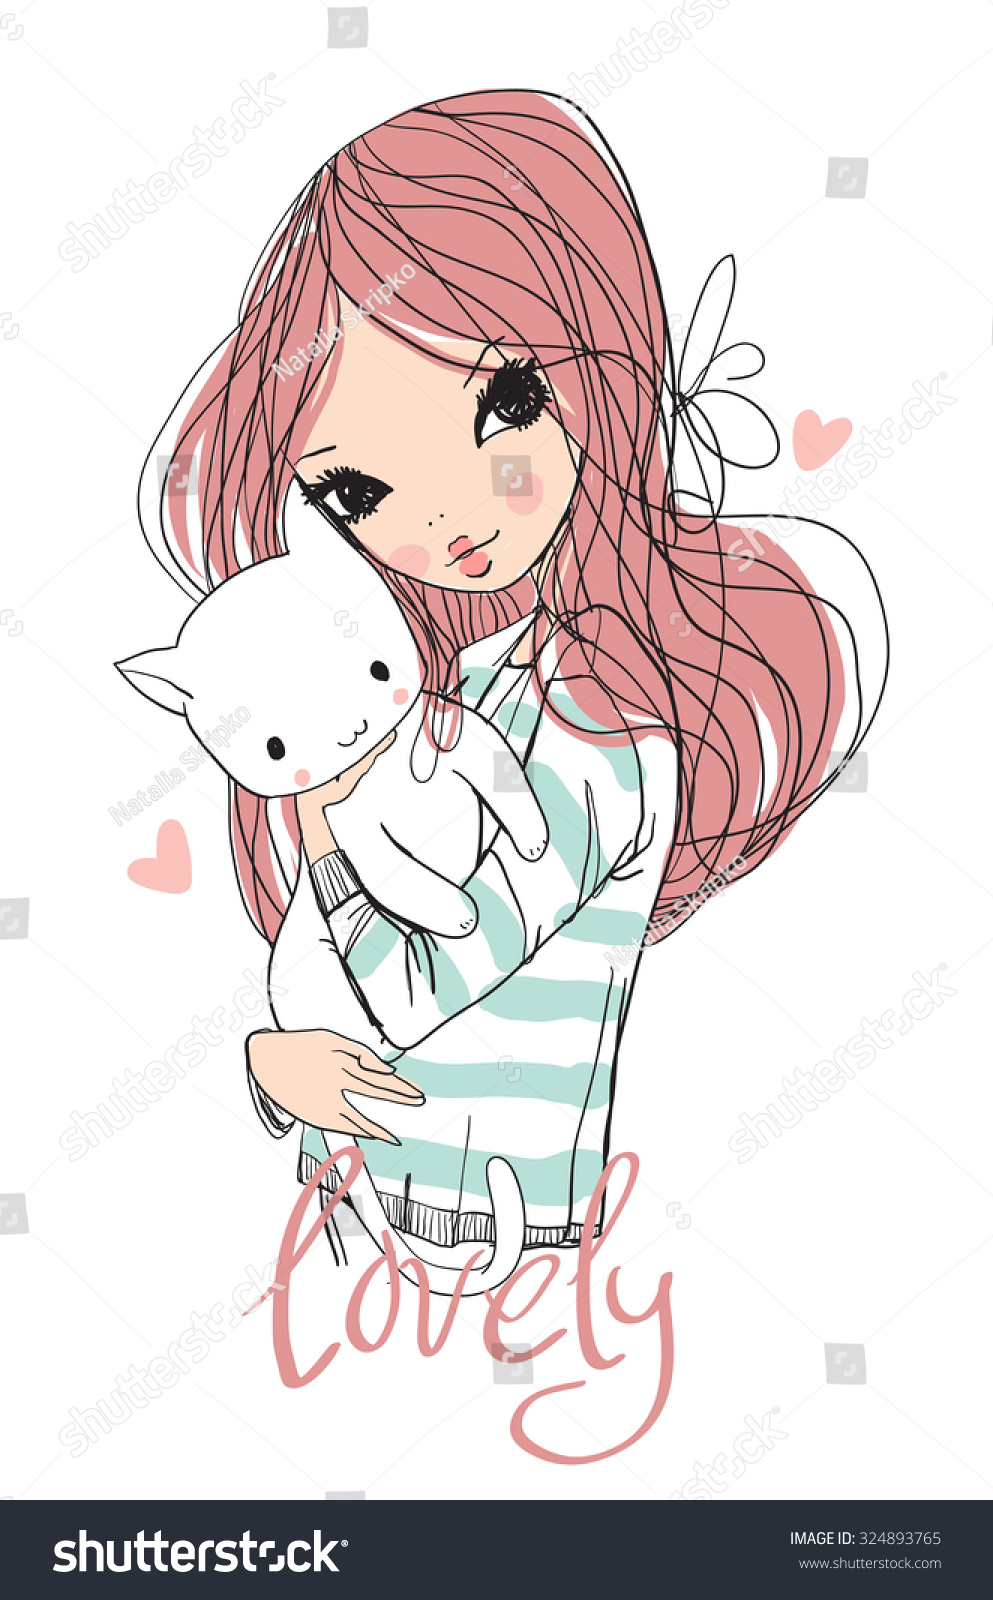 clipart girl with cat - photo #30